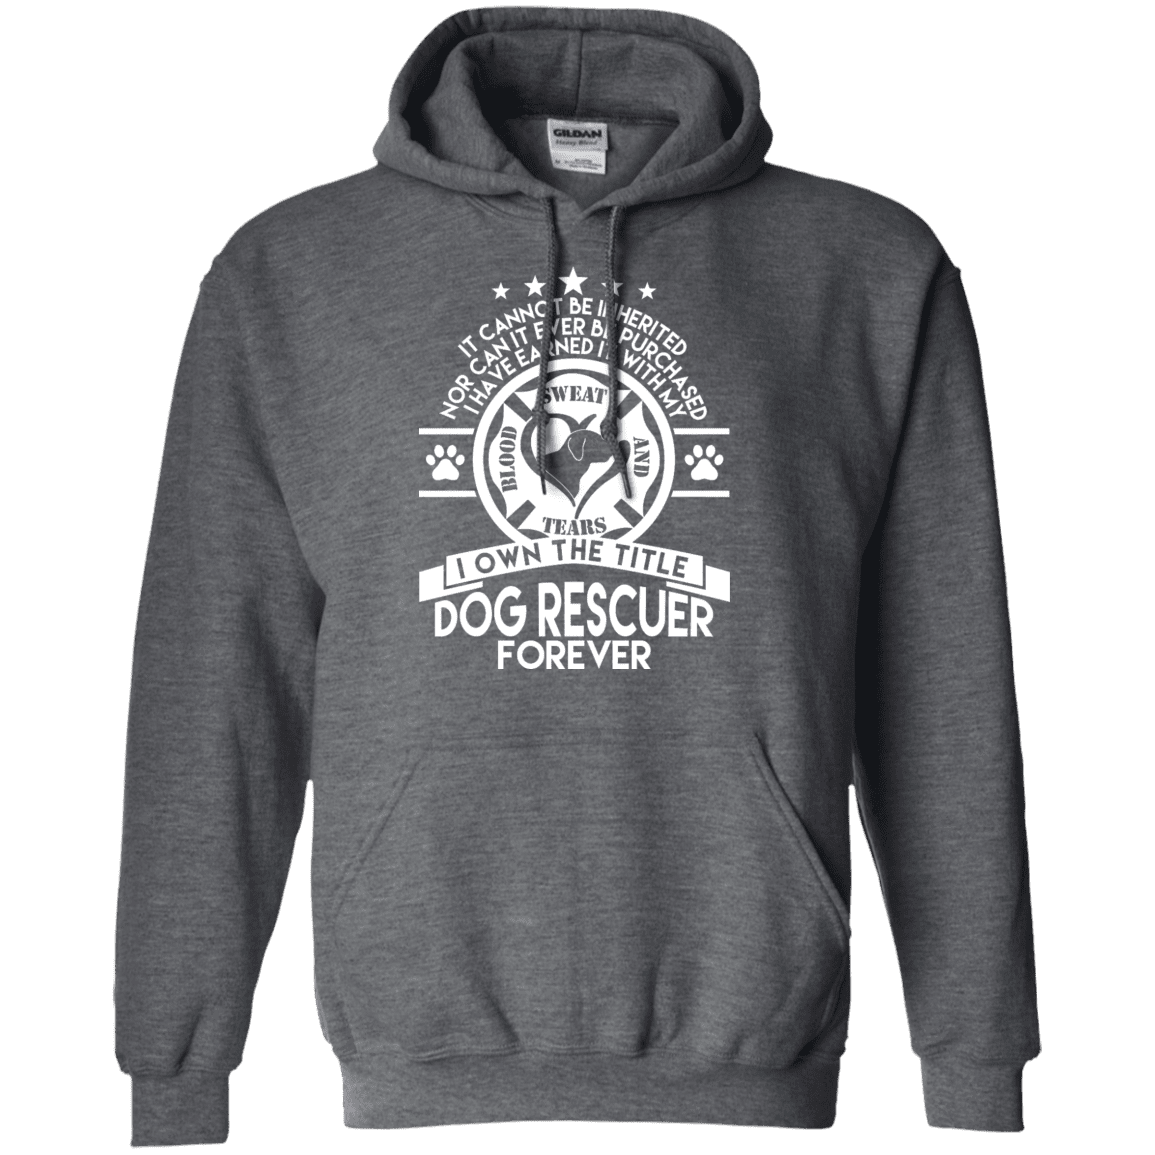 Dog Rescuer Forever - Hoodie.